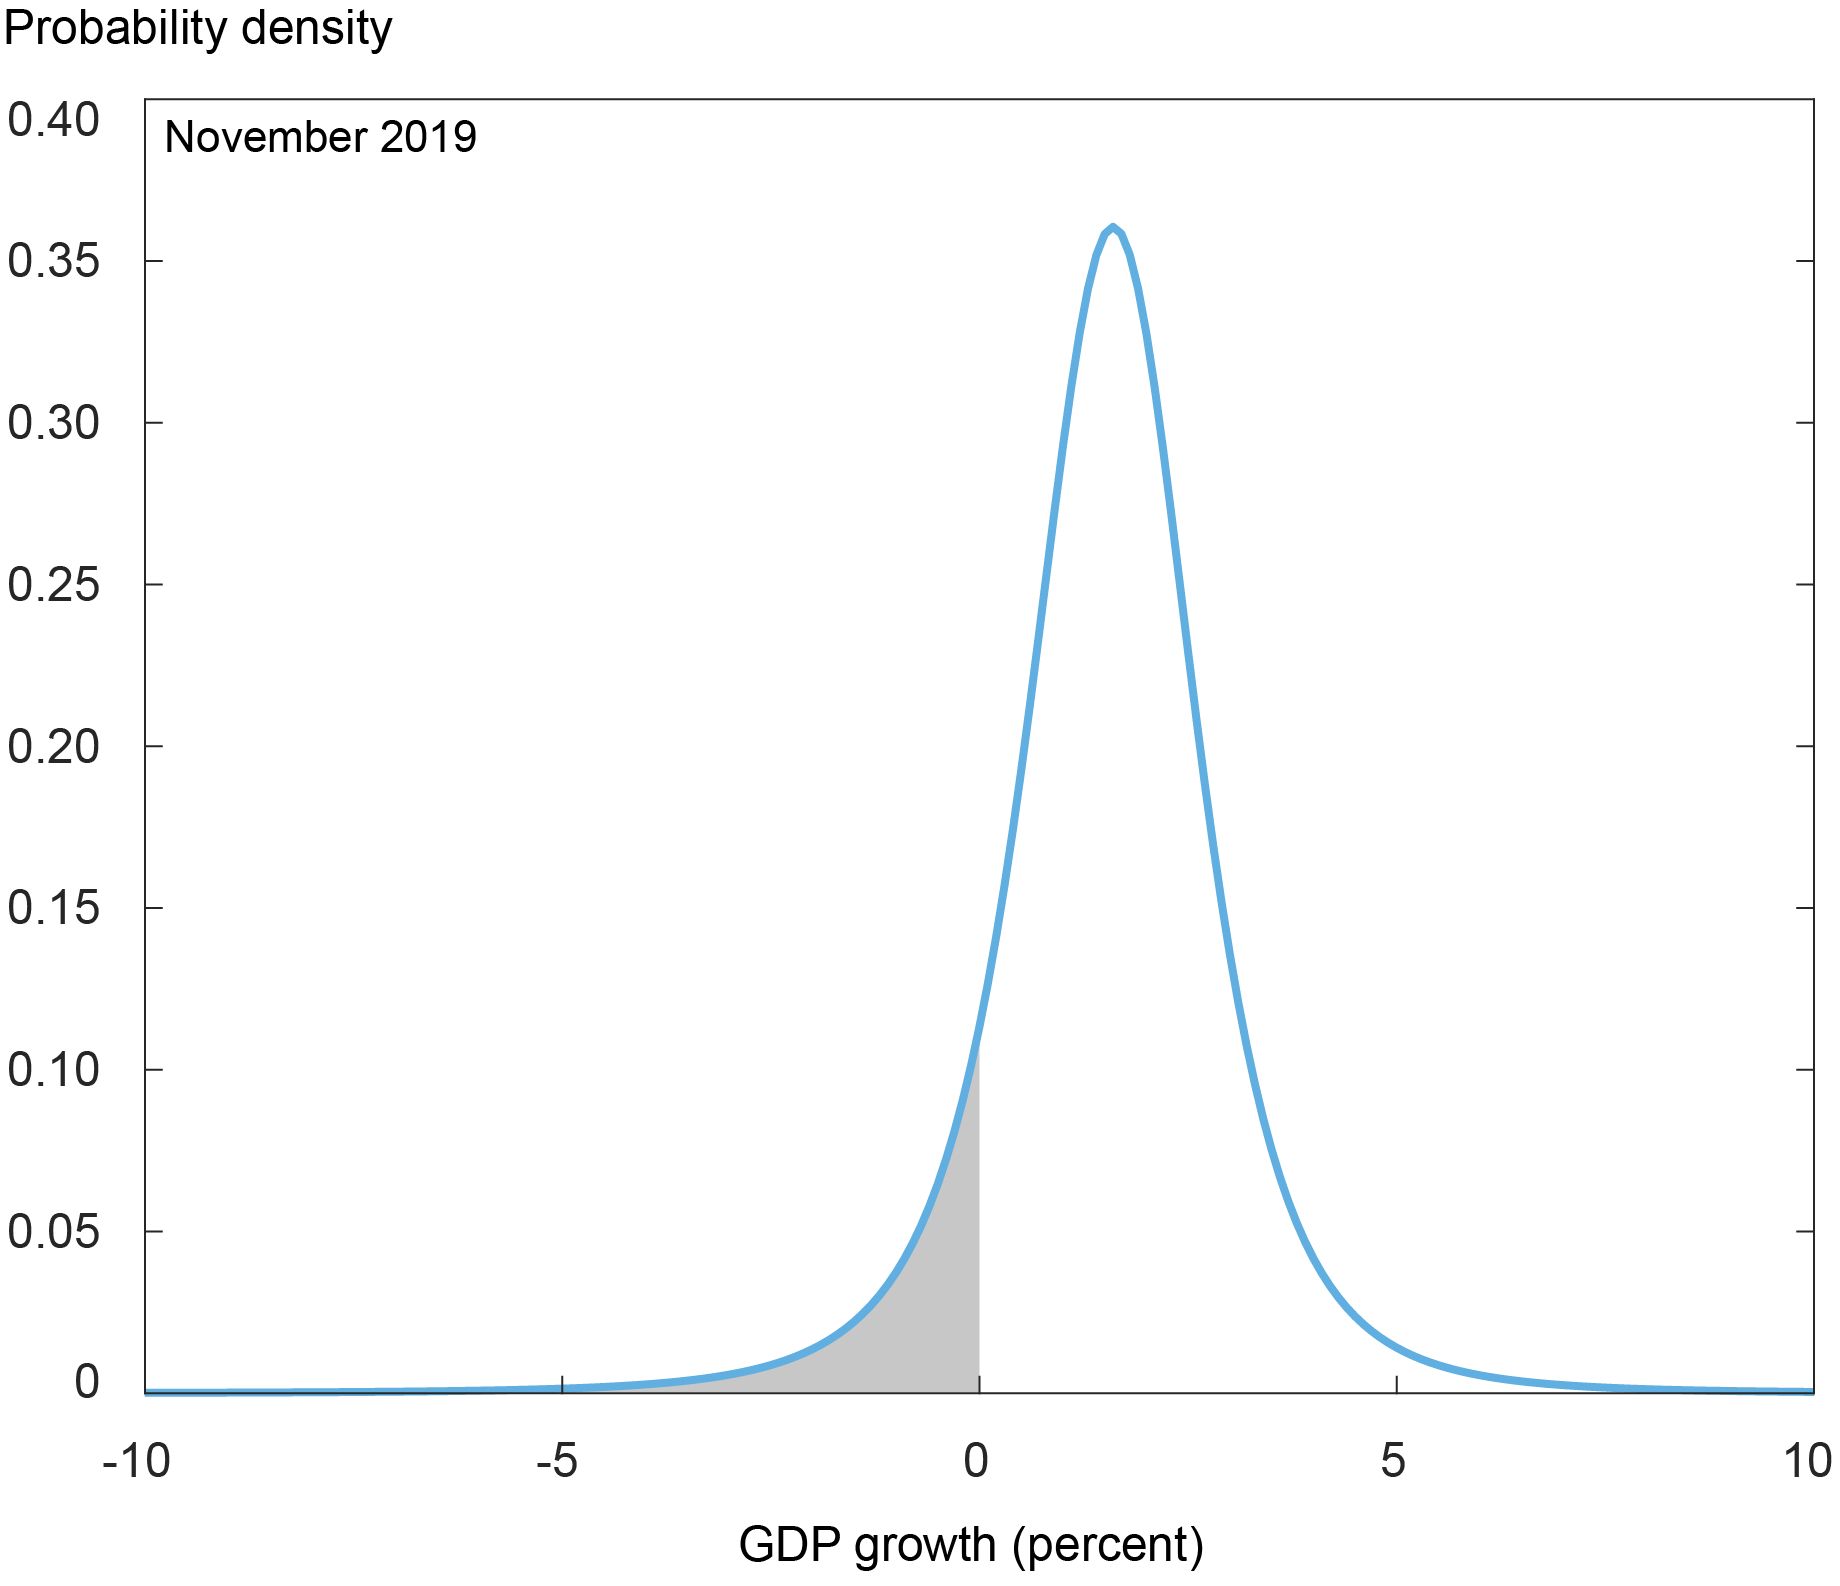 Liberty Street Economics probability density chart showing the estimated distribution of average real GDP growth as of November 2019, when financial conditions were relatively benign.